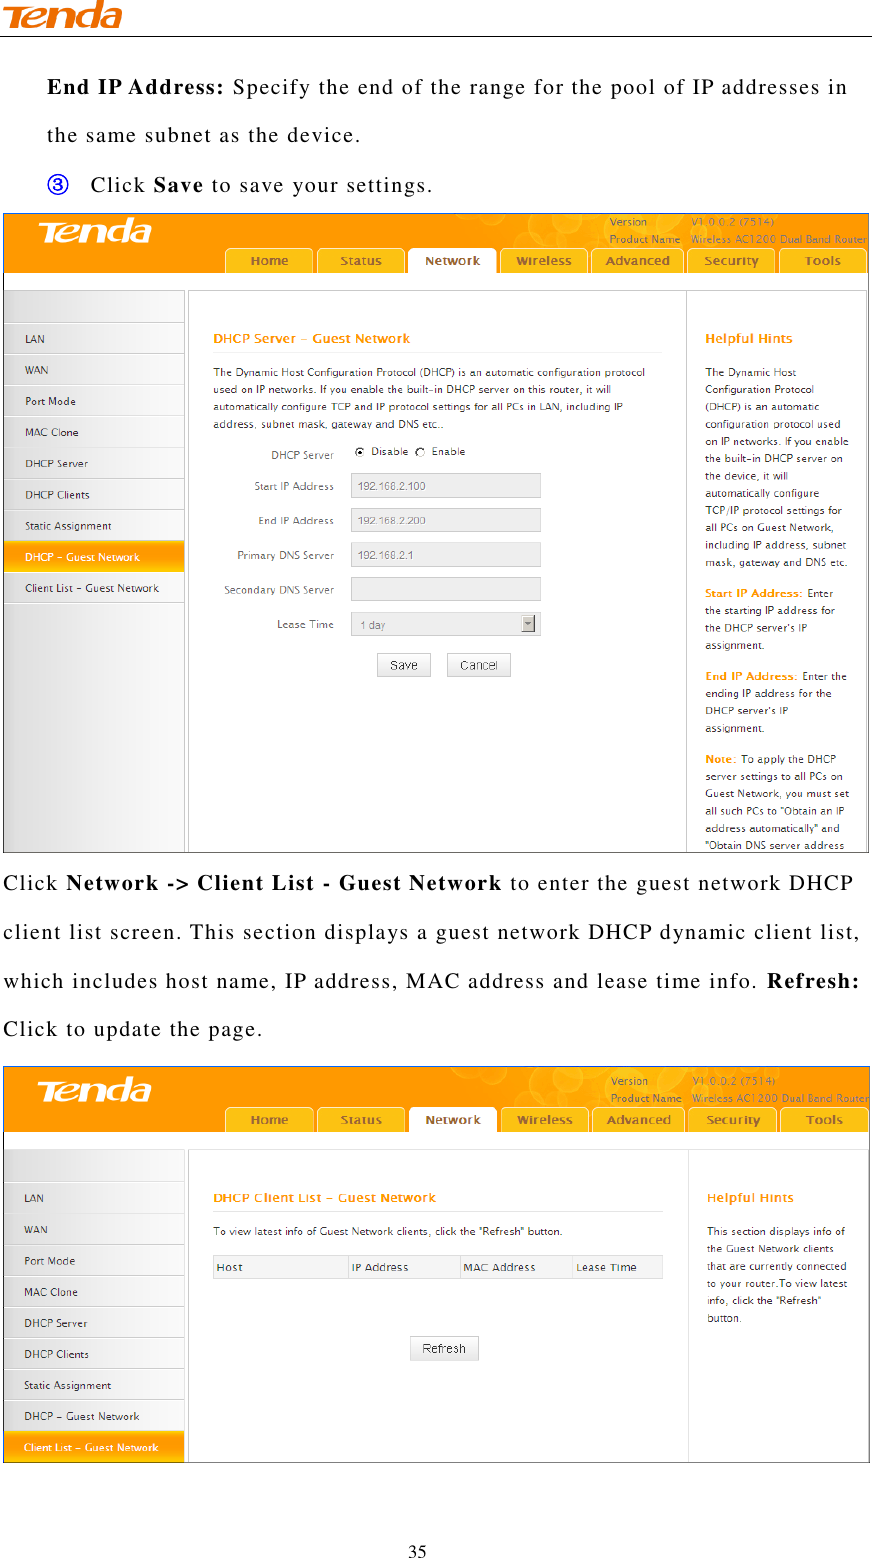                                    35 End IP Address: Specify the end of the range for the pool of IP addresses in the same subnet as the device. ③ Click Save to save your settings.  Click Network -&gt; Client List - Guest Network to enter the guest network DHCP client list screen. This section displays a guest network DHCP dynamic client list, which includes host name, IP address, MAC address and lease time info. Refresh: Click to update the page.  